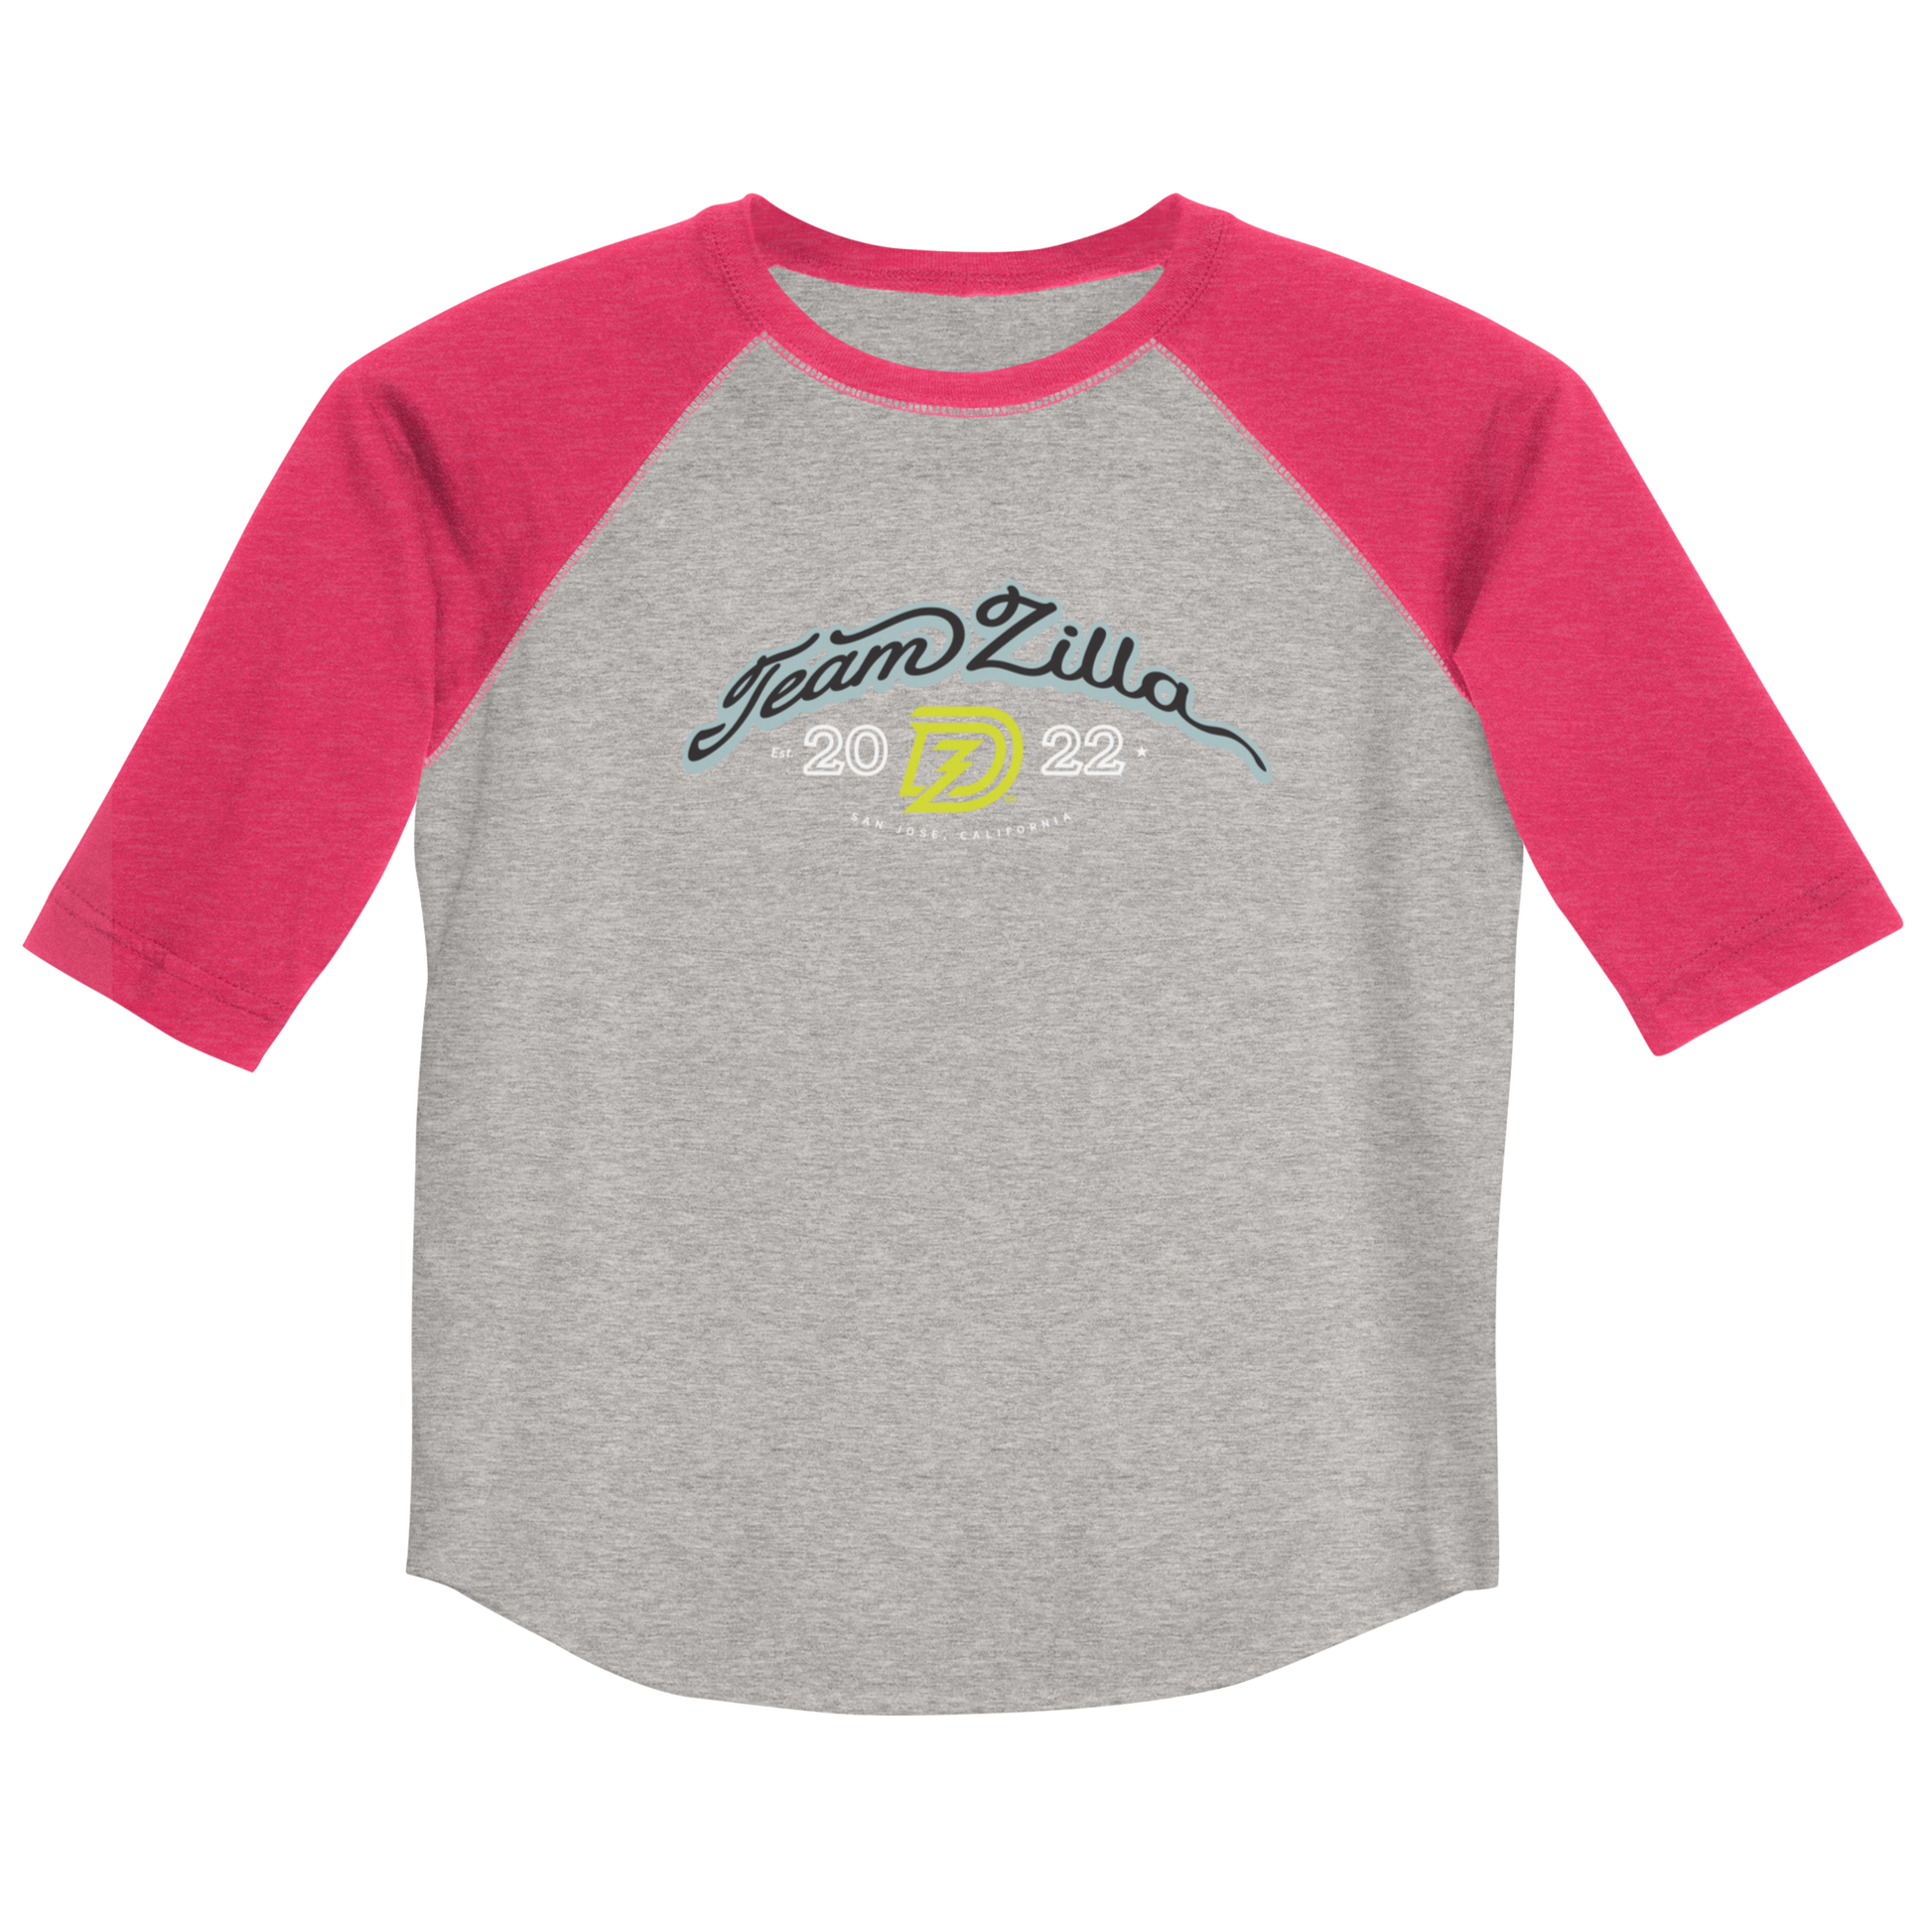 Team Zilla 2022 Youth Shirt in Vintage Heather with Vintage Hot Pink Sleeves